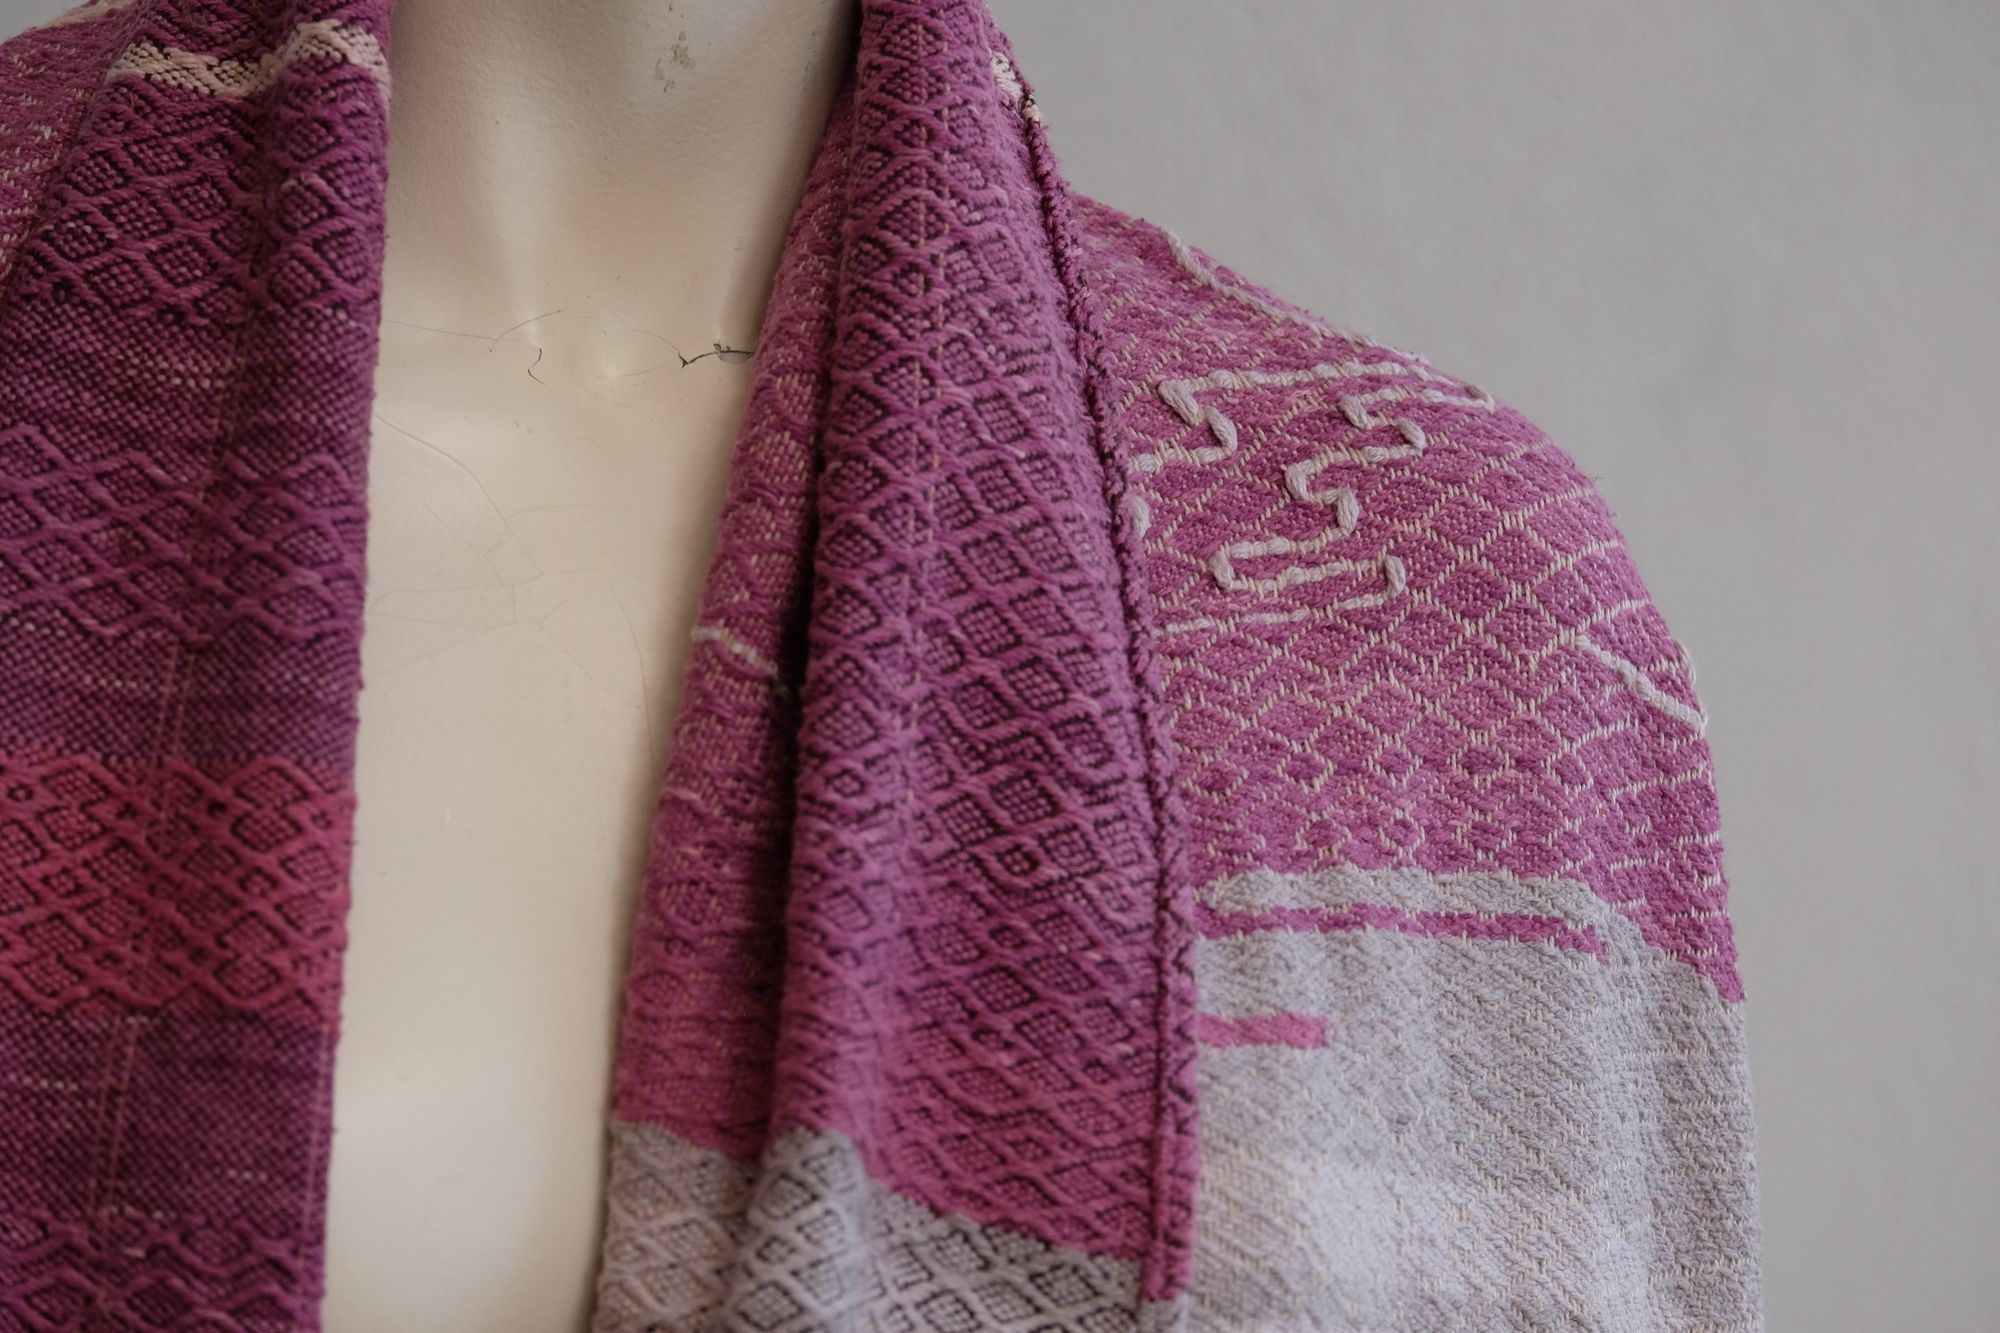 Handwoven fabric lays on a white mannequin in a gallery space. The fabric is naturally dyed with cochineal in all shades of pink and fuchsia with a design of a river and three moons on it